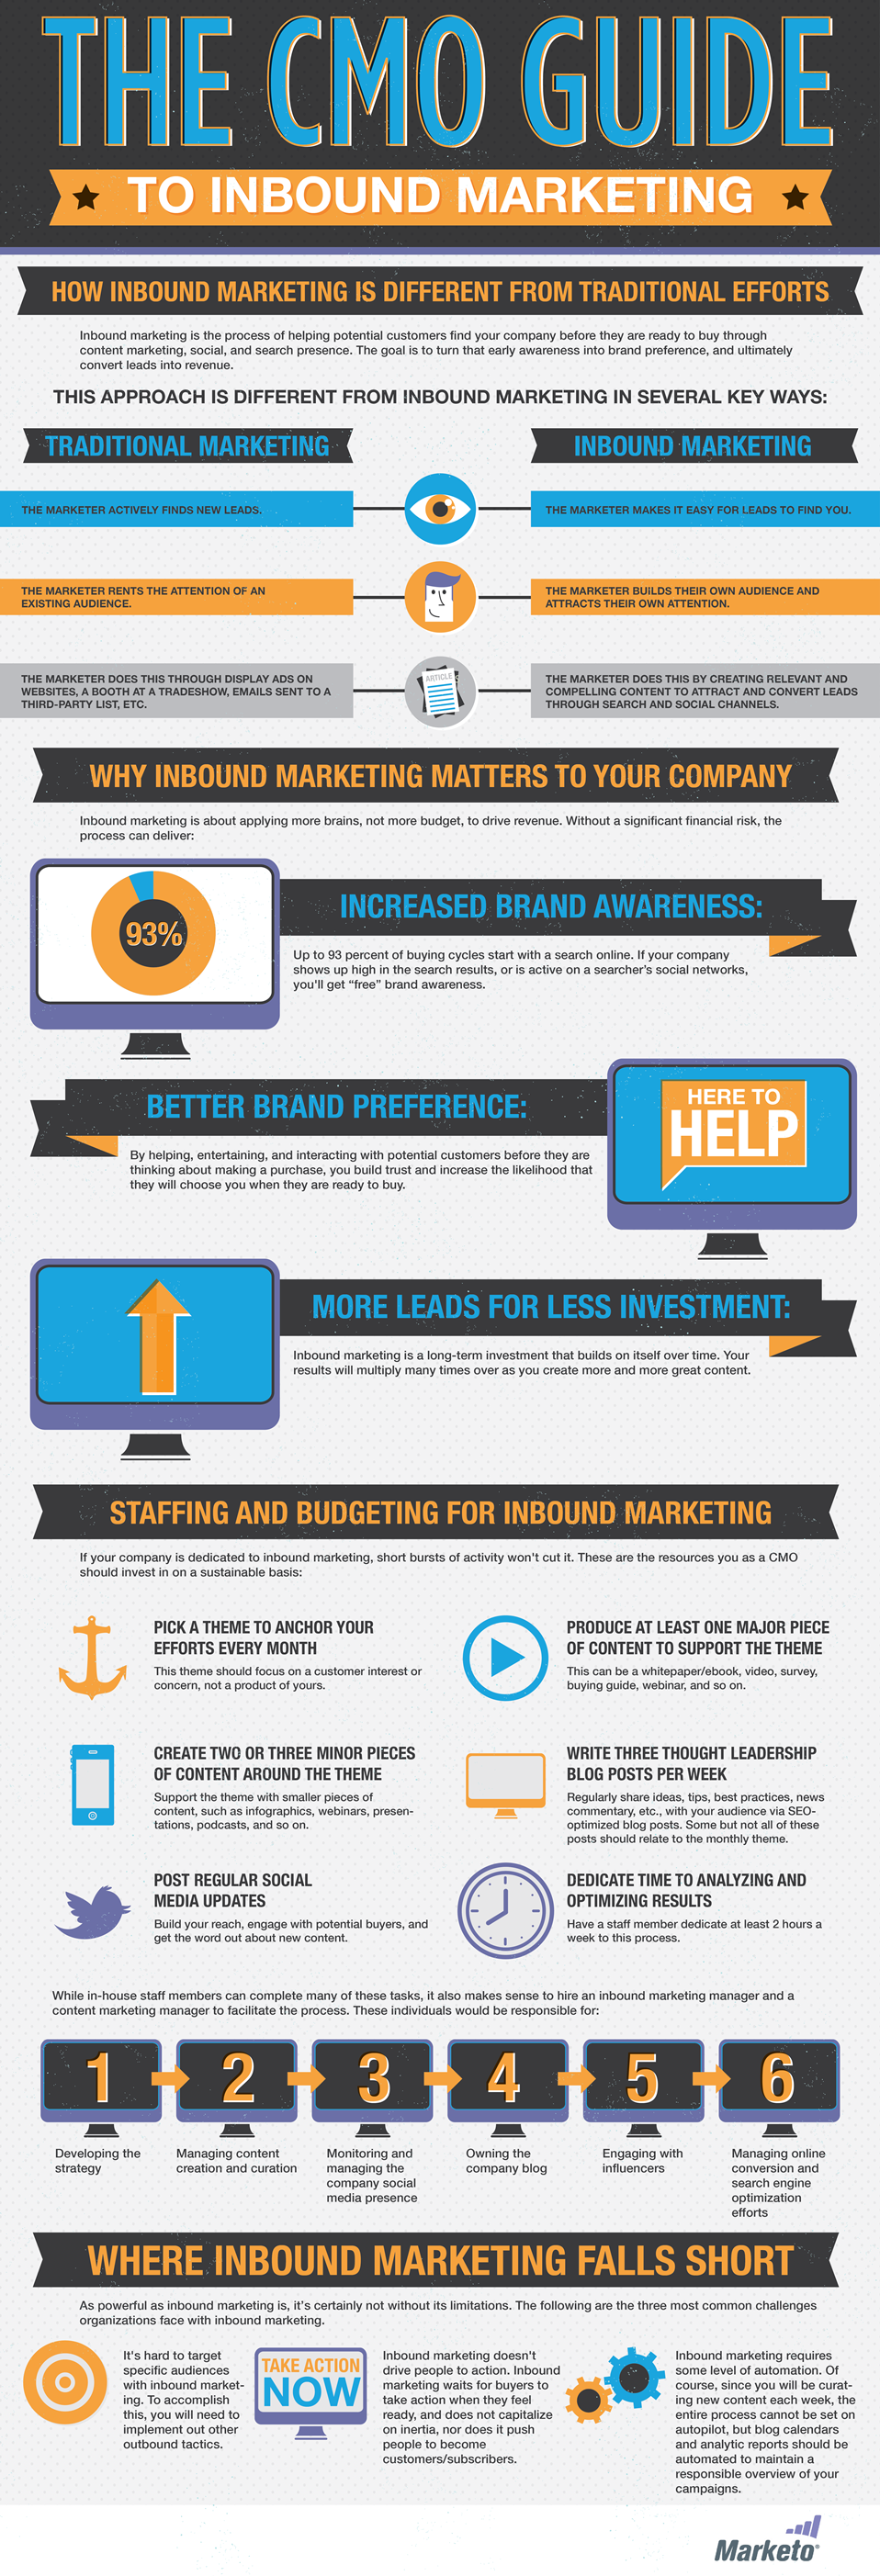 The CMO Guide to Inbound Marketing Infographic by Marketo